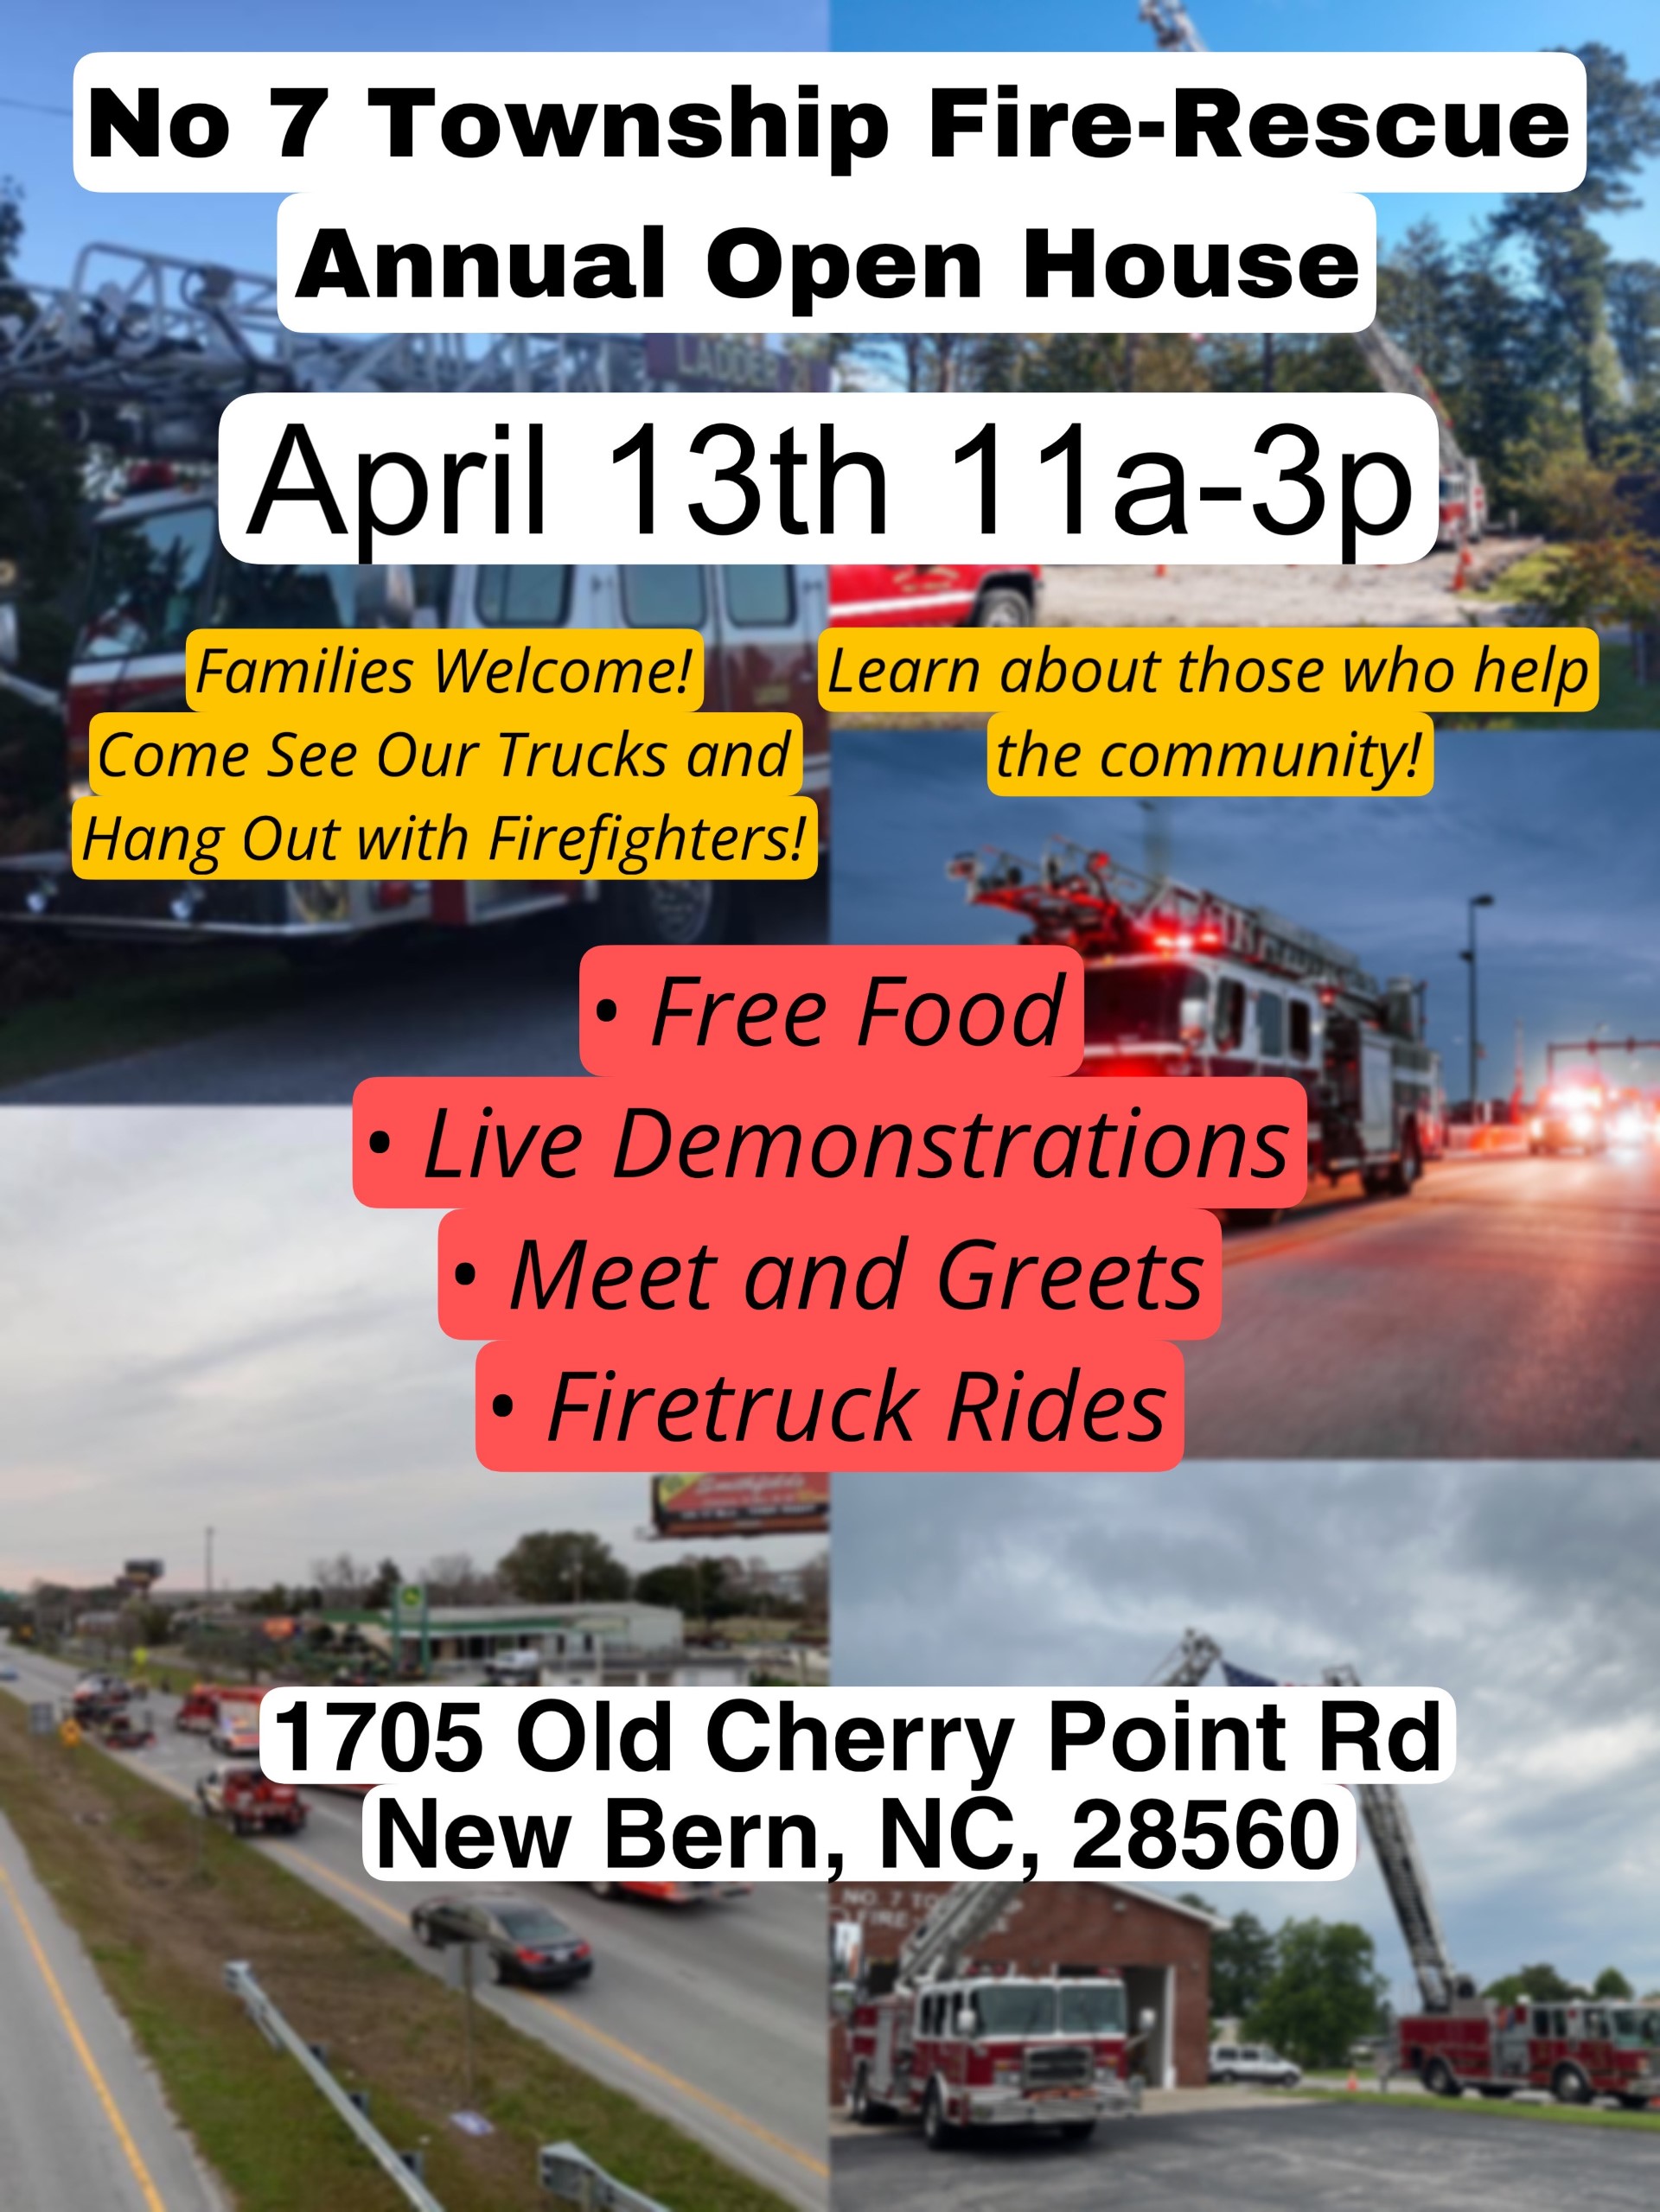 No 7 Township Fire-Rescue Annual Open House